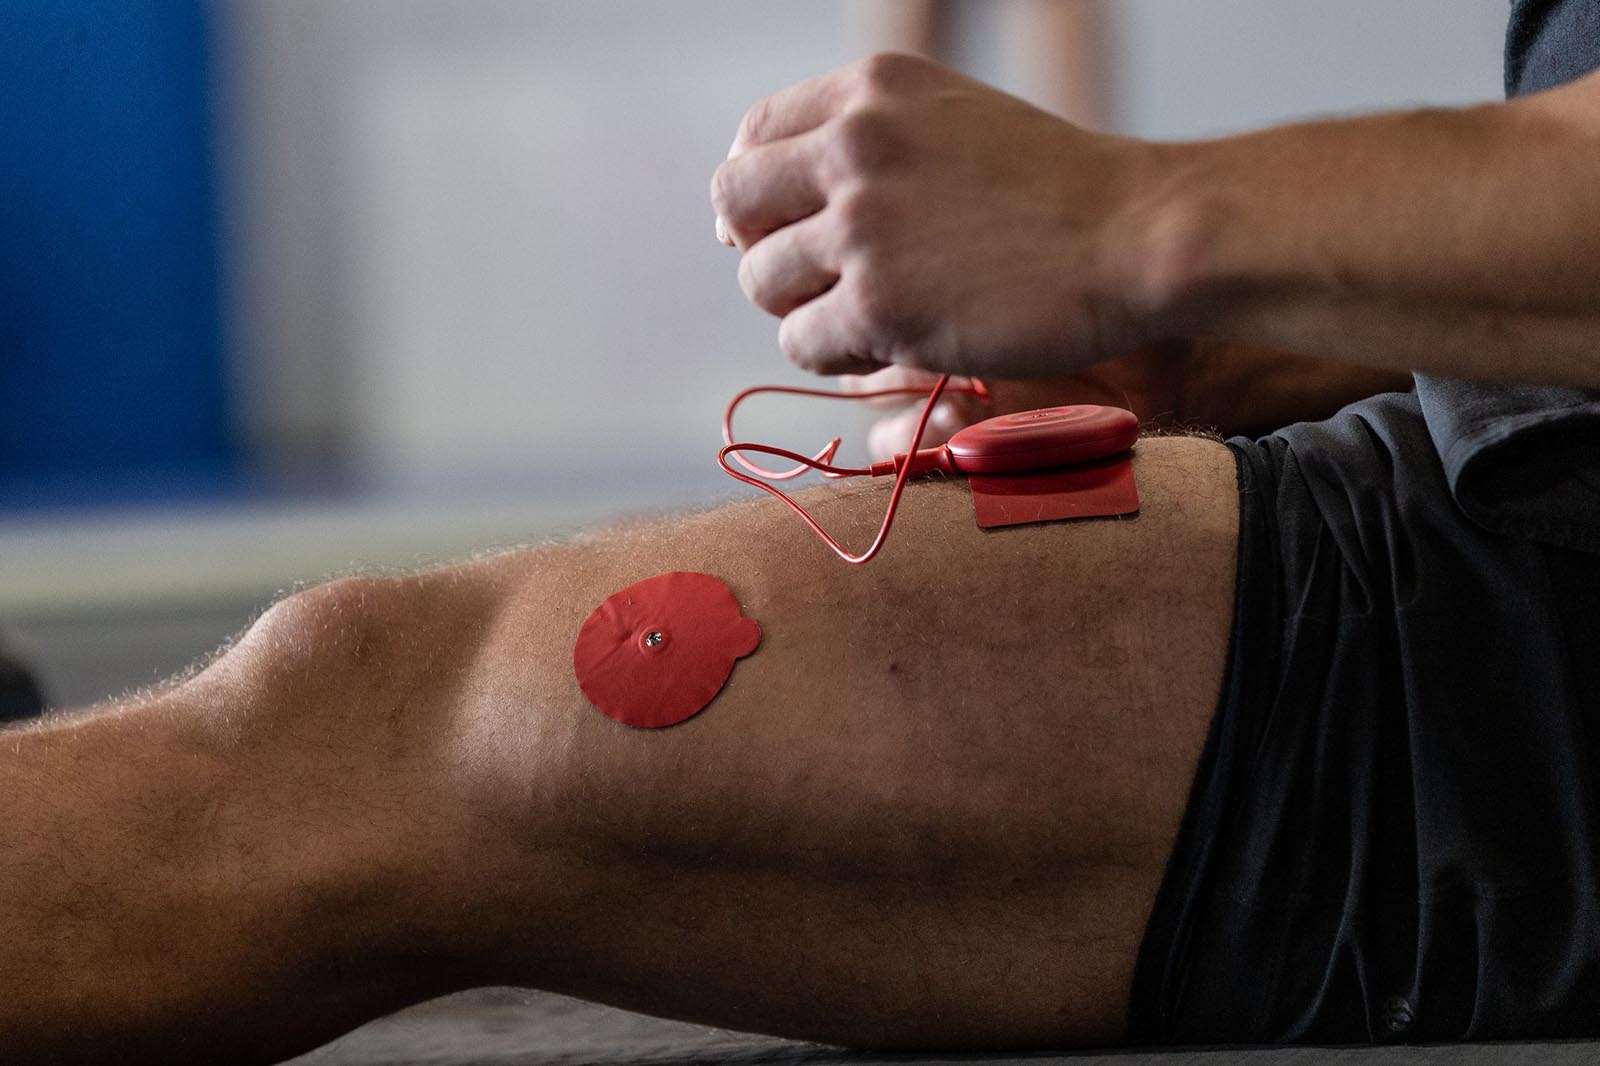 #100: How to Use PowerDot to Reduce Quad Pain